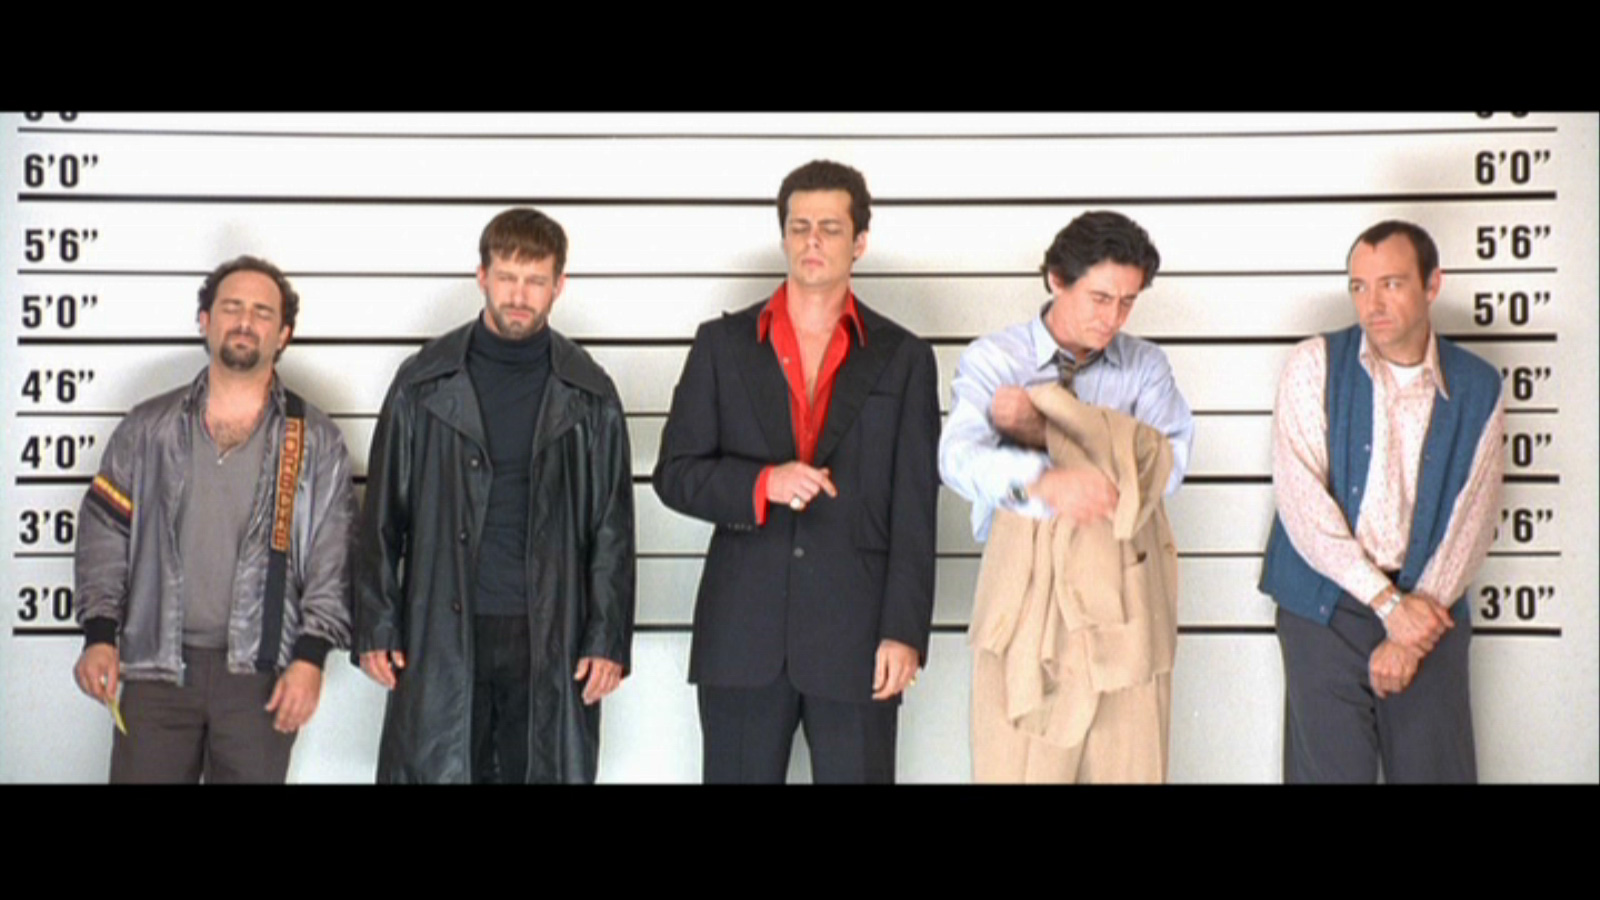 Key Scene: 'The Usual Suspects' unveils its greatest trick of all